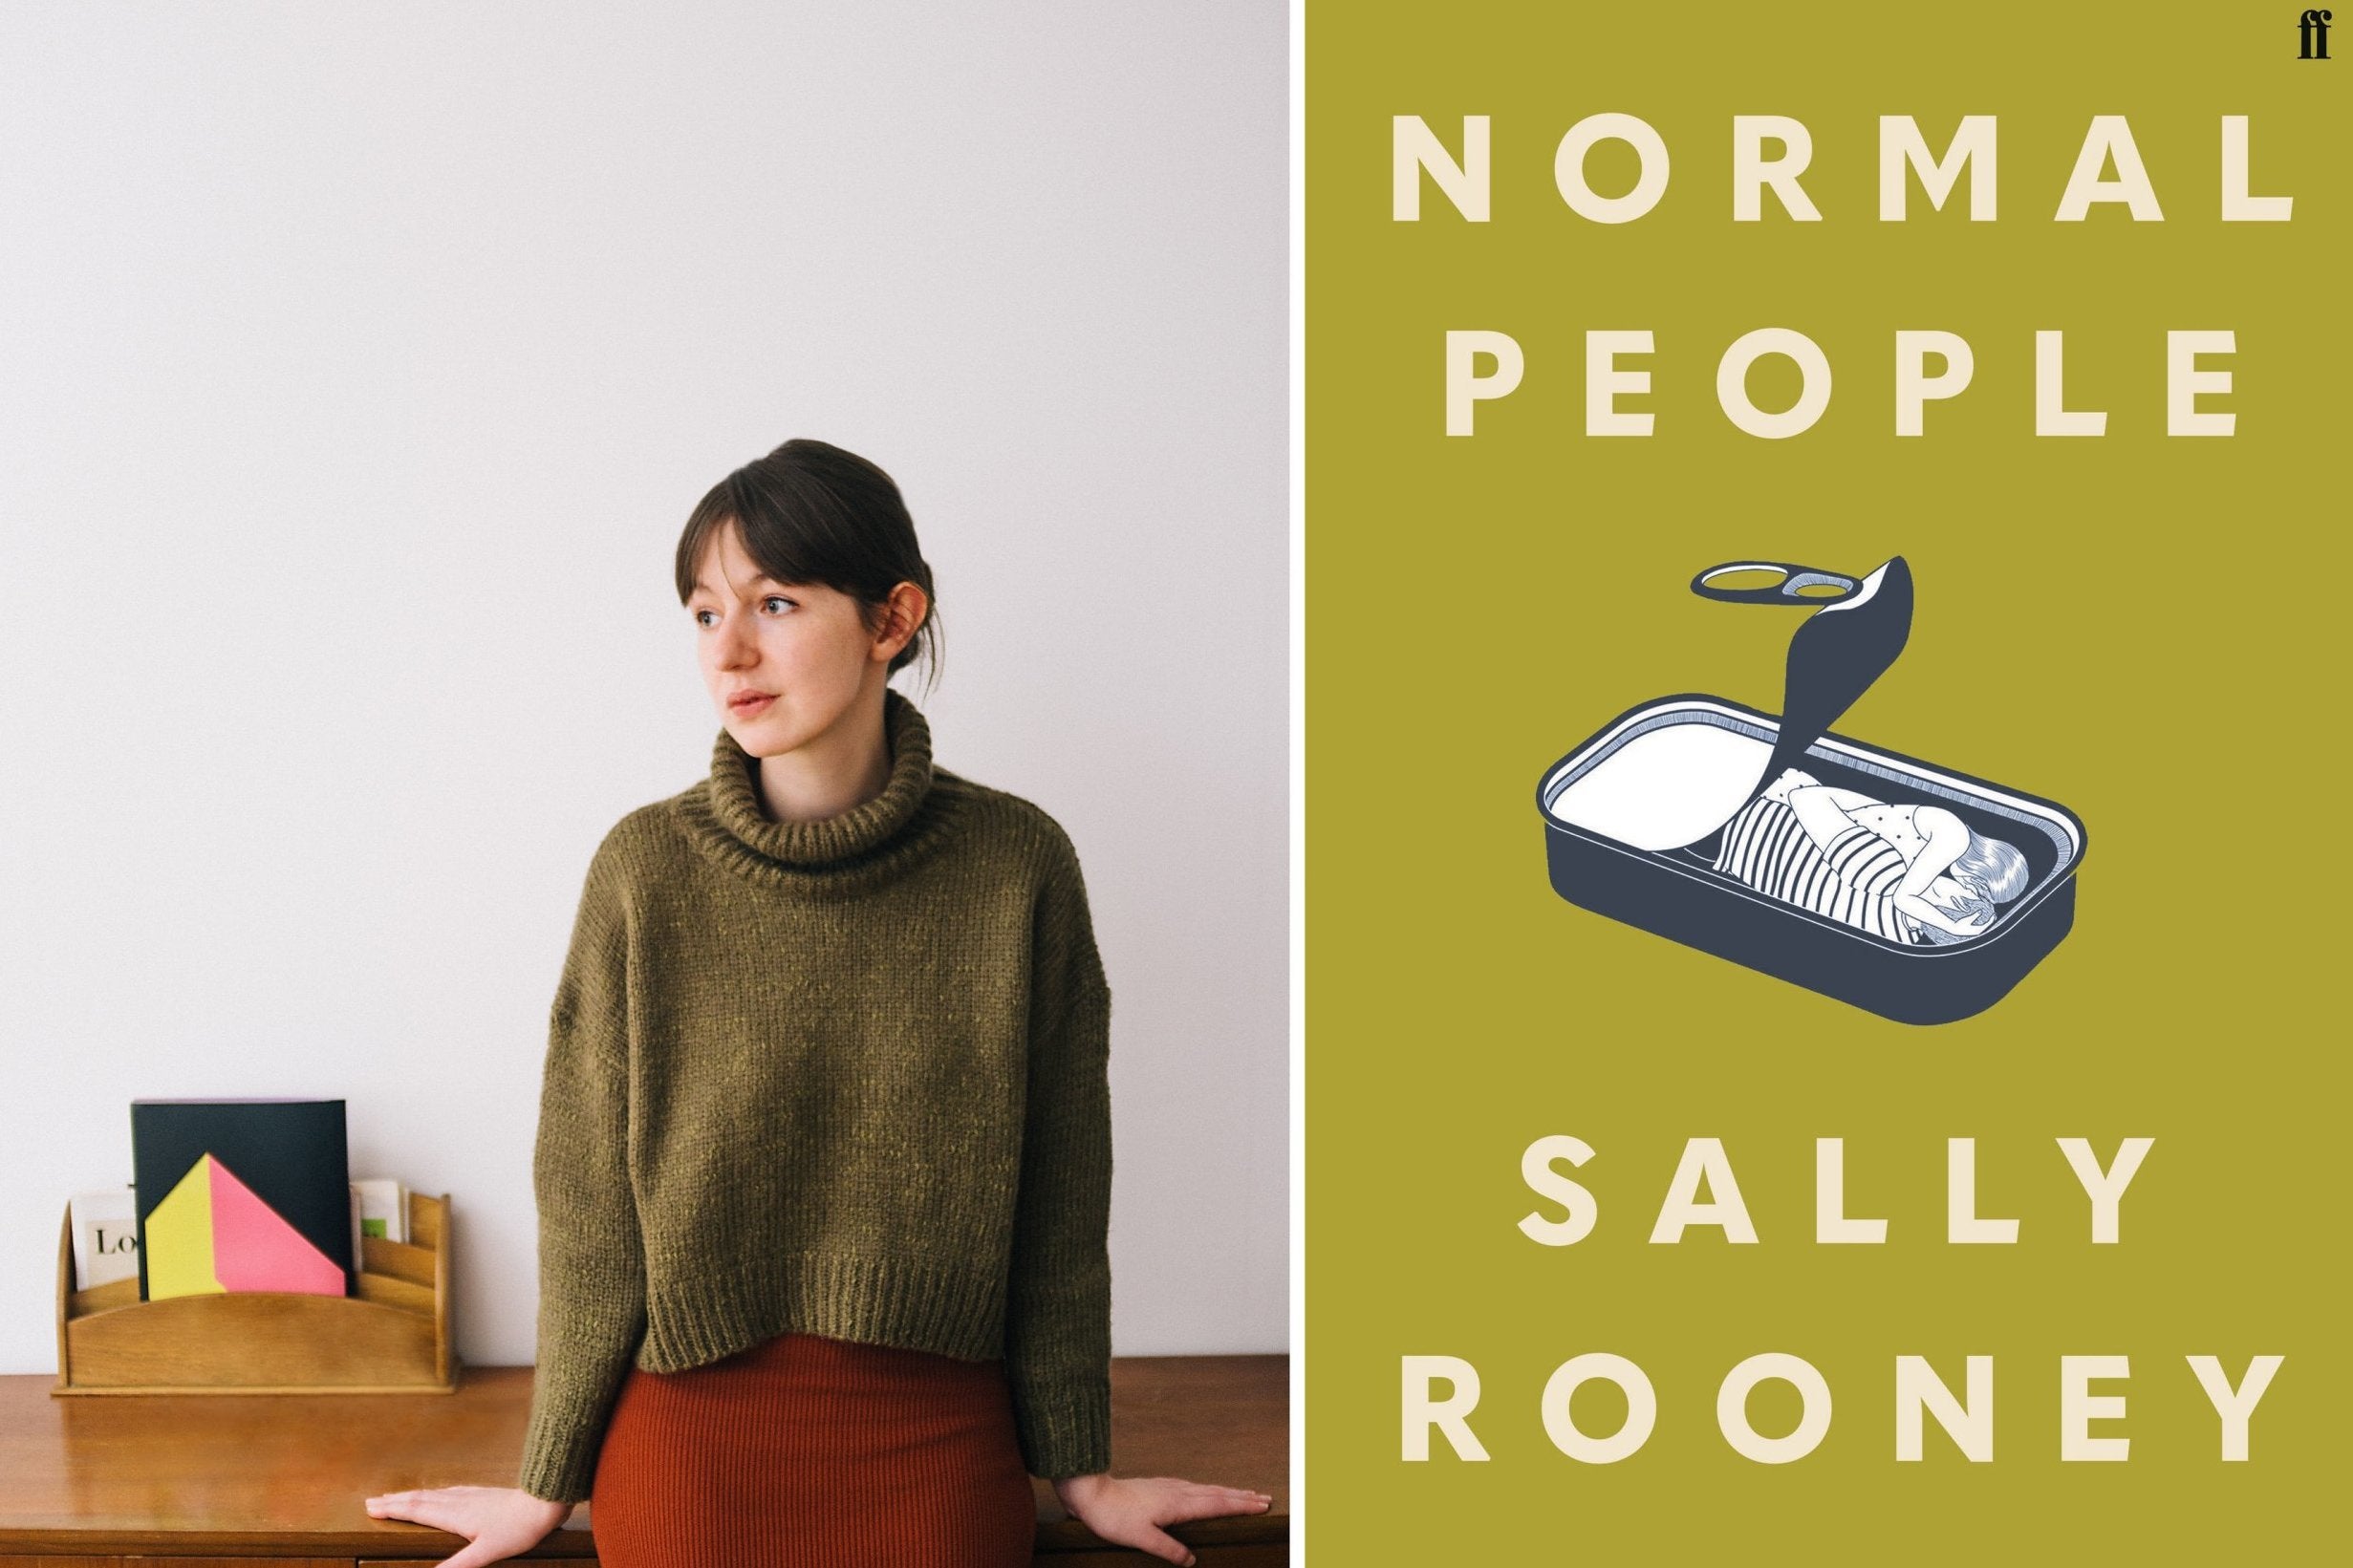 Image result for sally rooney normal people